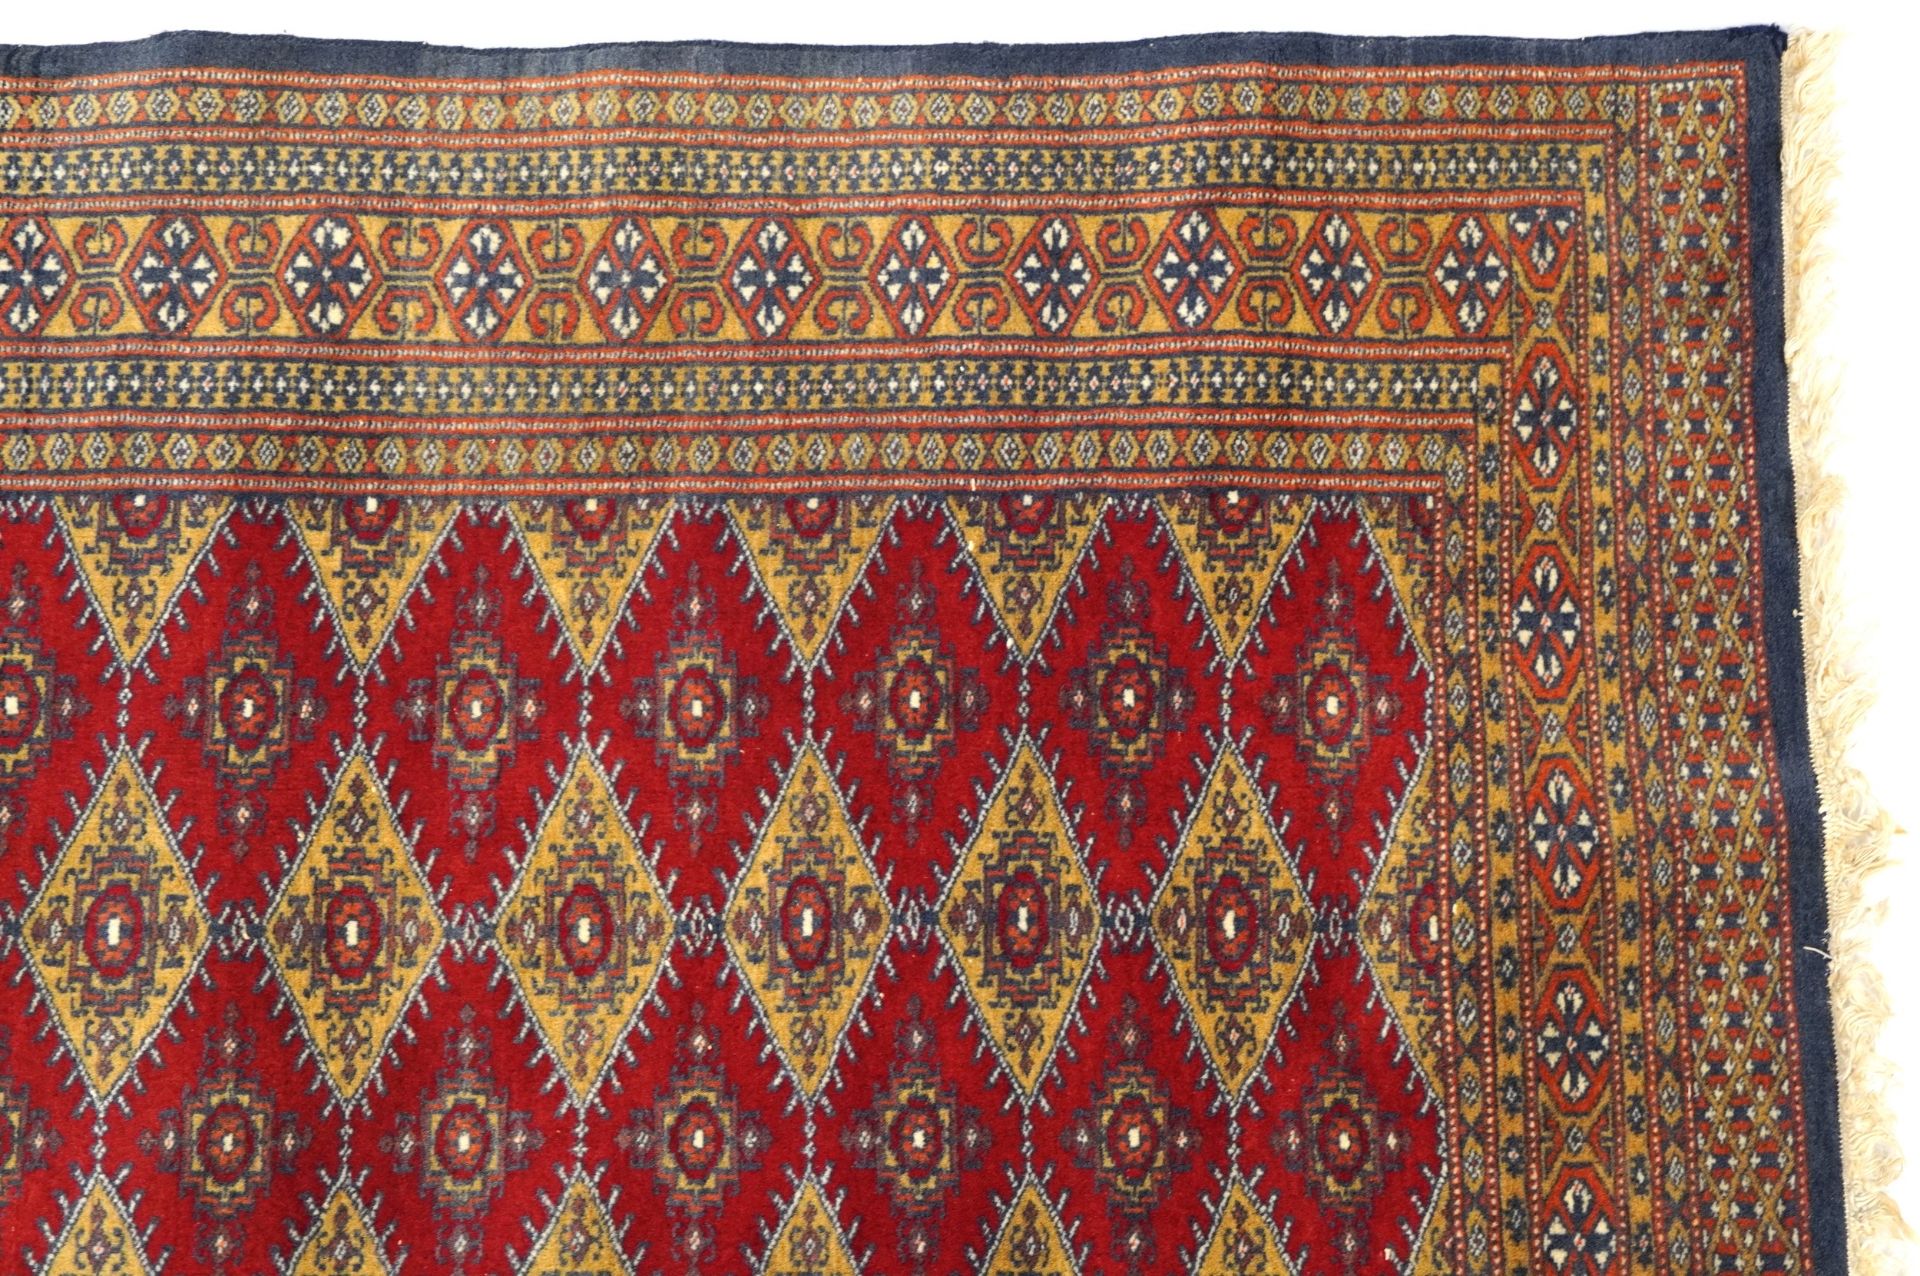 Rectangular red and blue ground rug with all over geometric design, 145cm x 91cm - Image 3 of 6